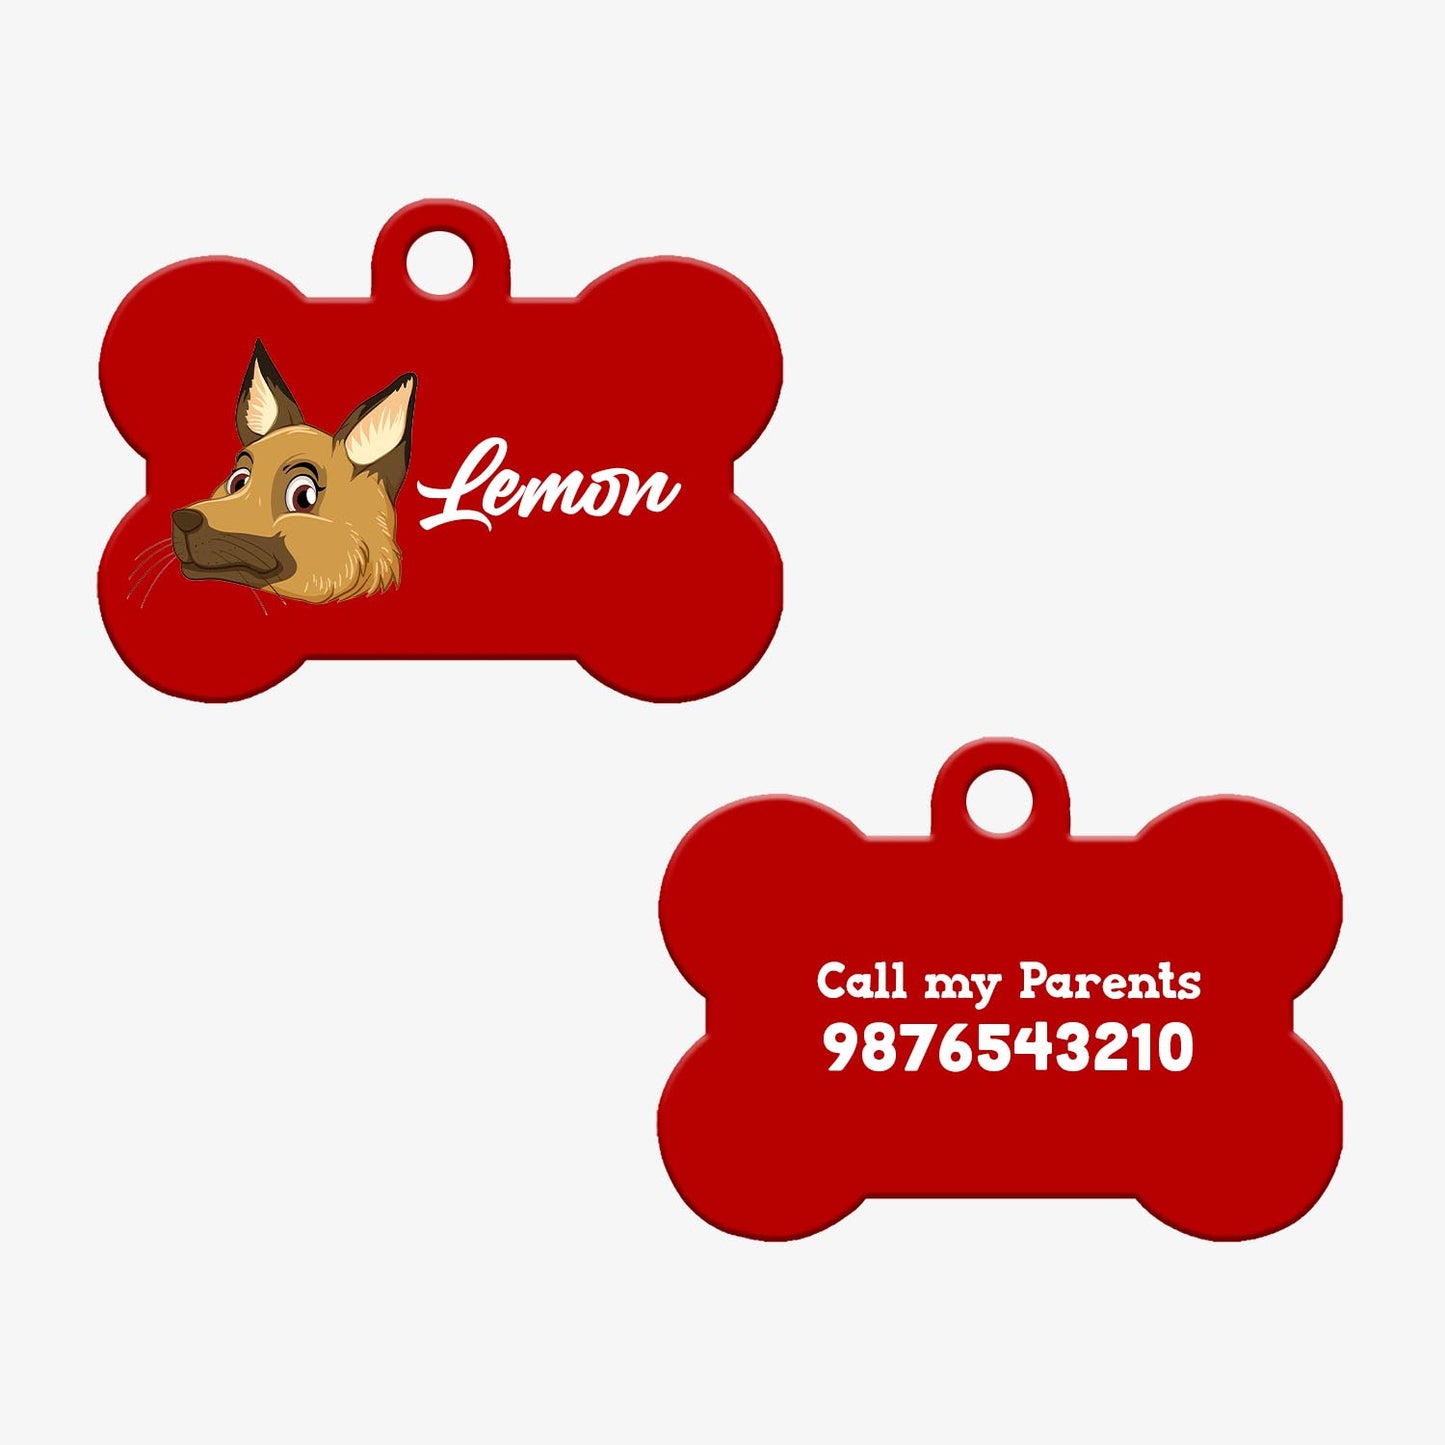 Personalized Pet ID Tag - Indie 2